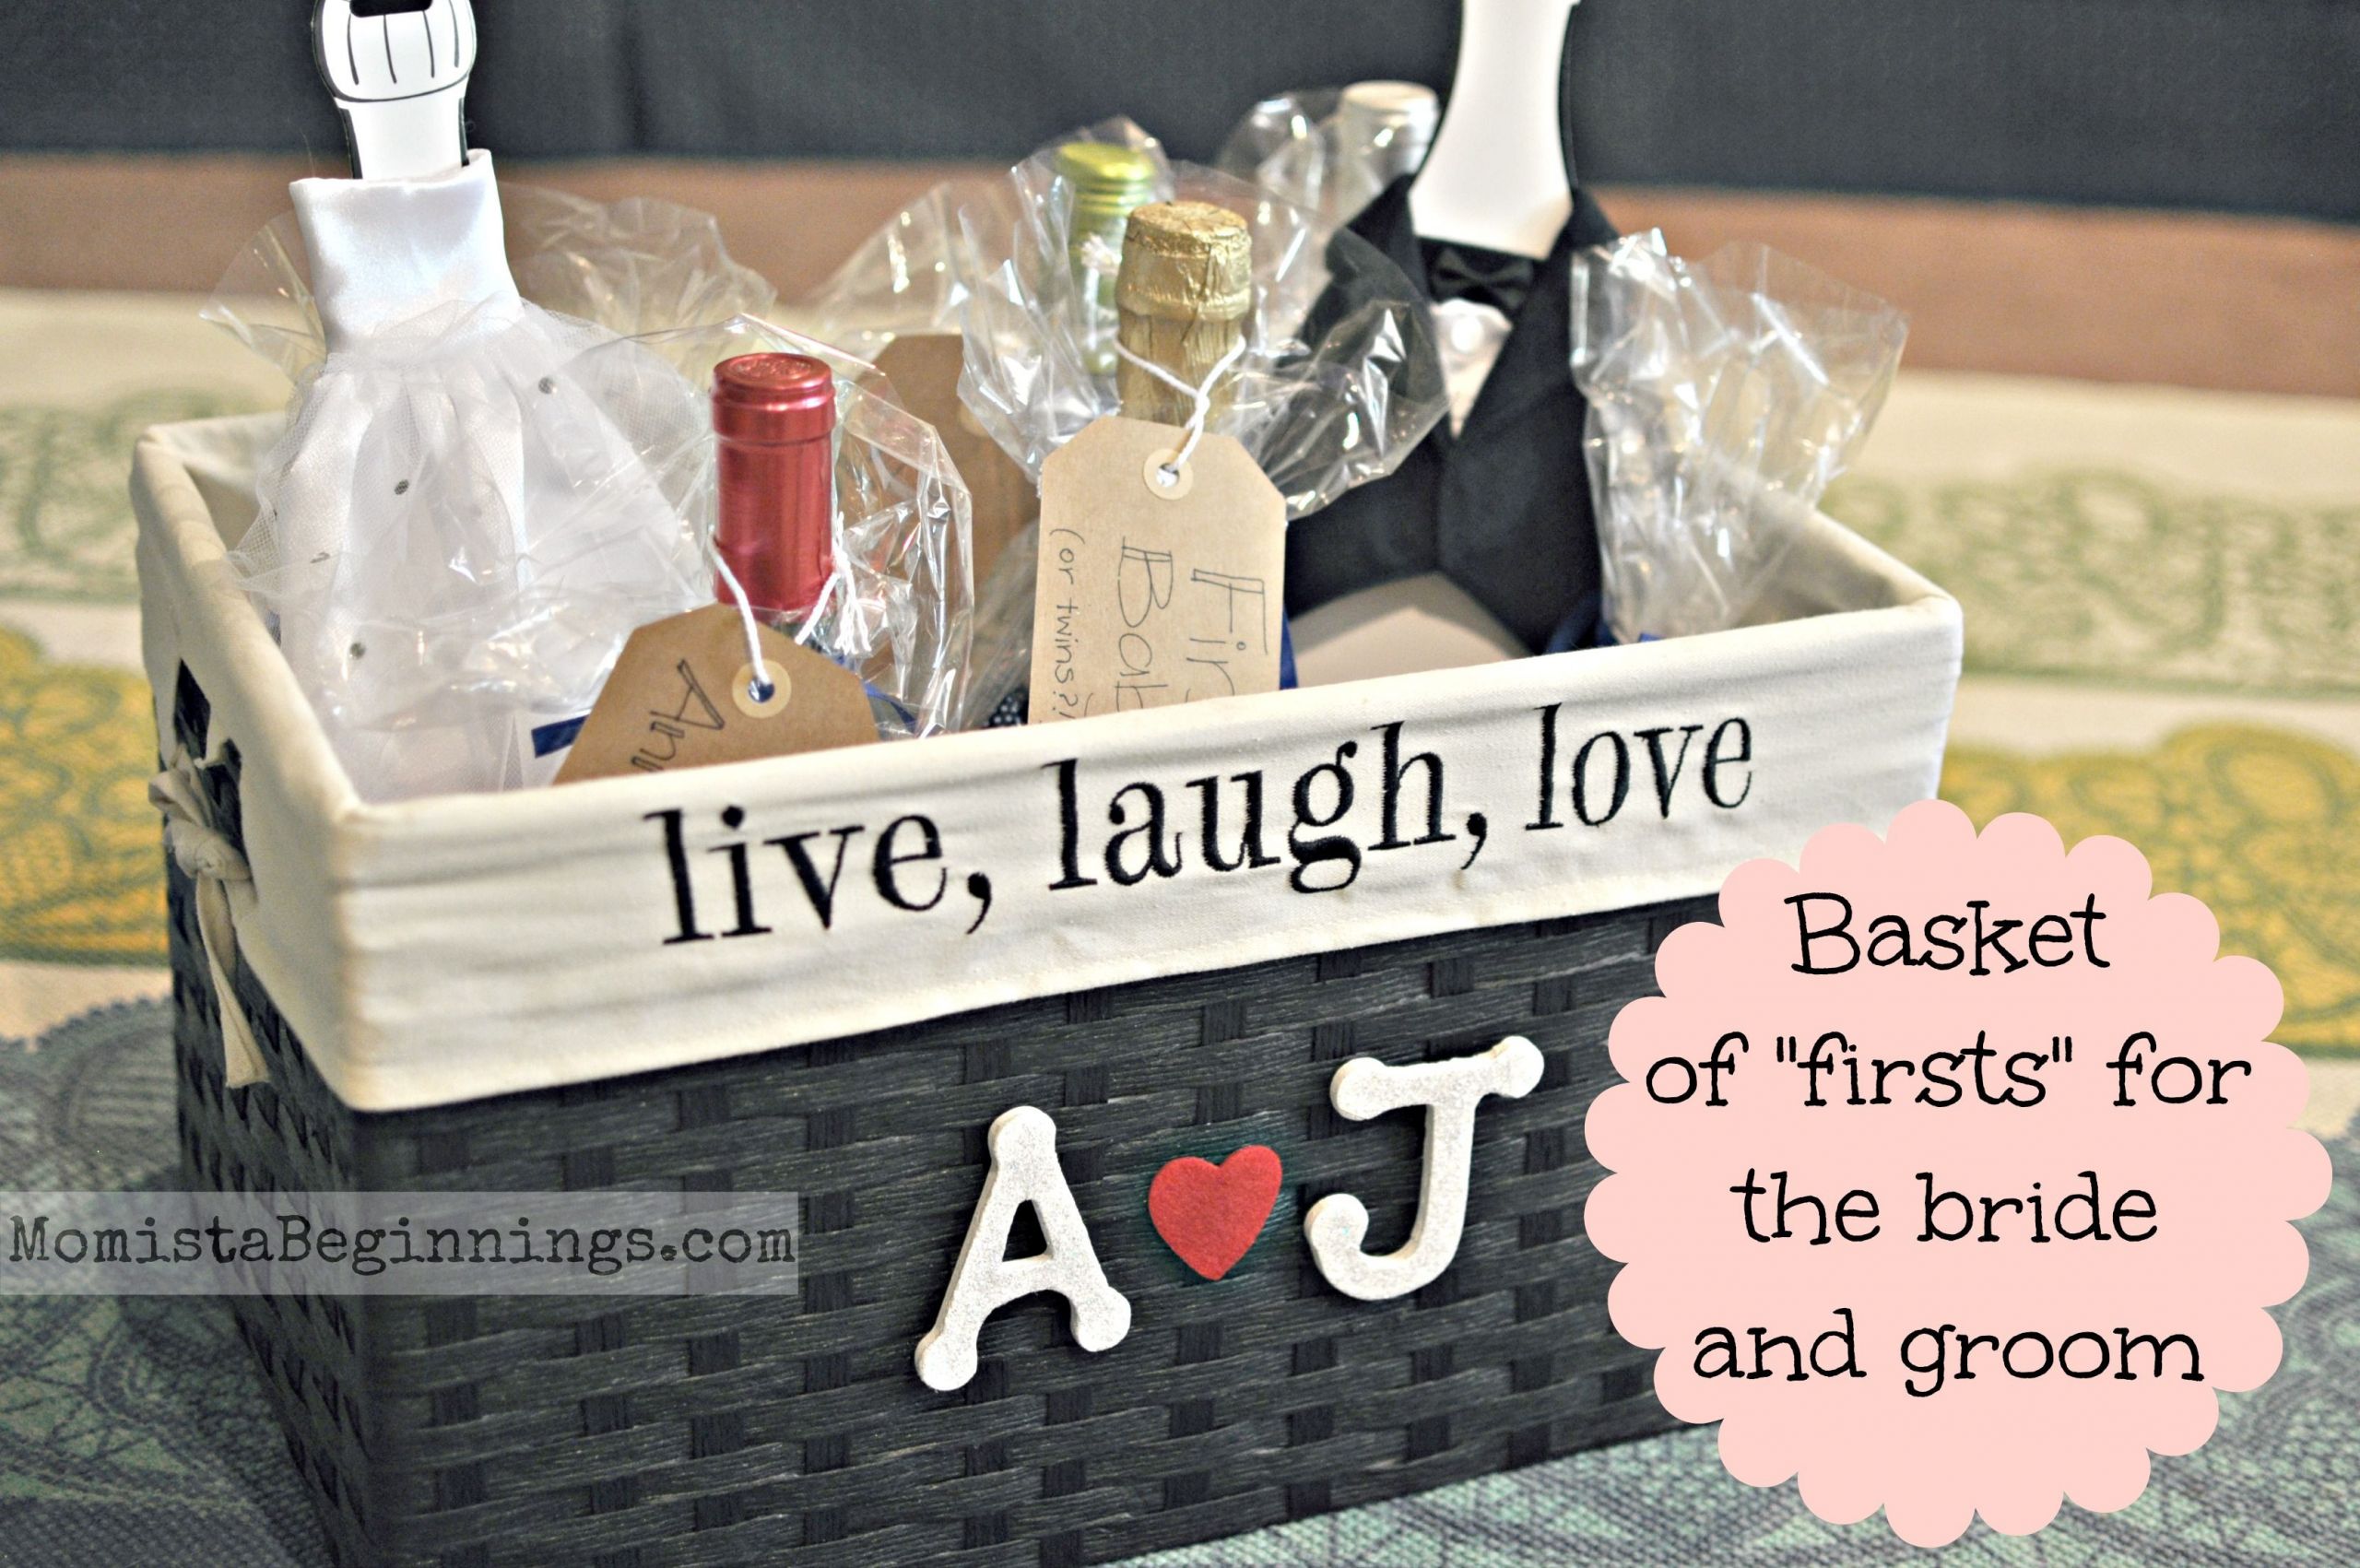 DIY Wedding Gift Ideas For Bride And Groom
 Basket of “Firsts” for the Bride and Groom DIY